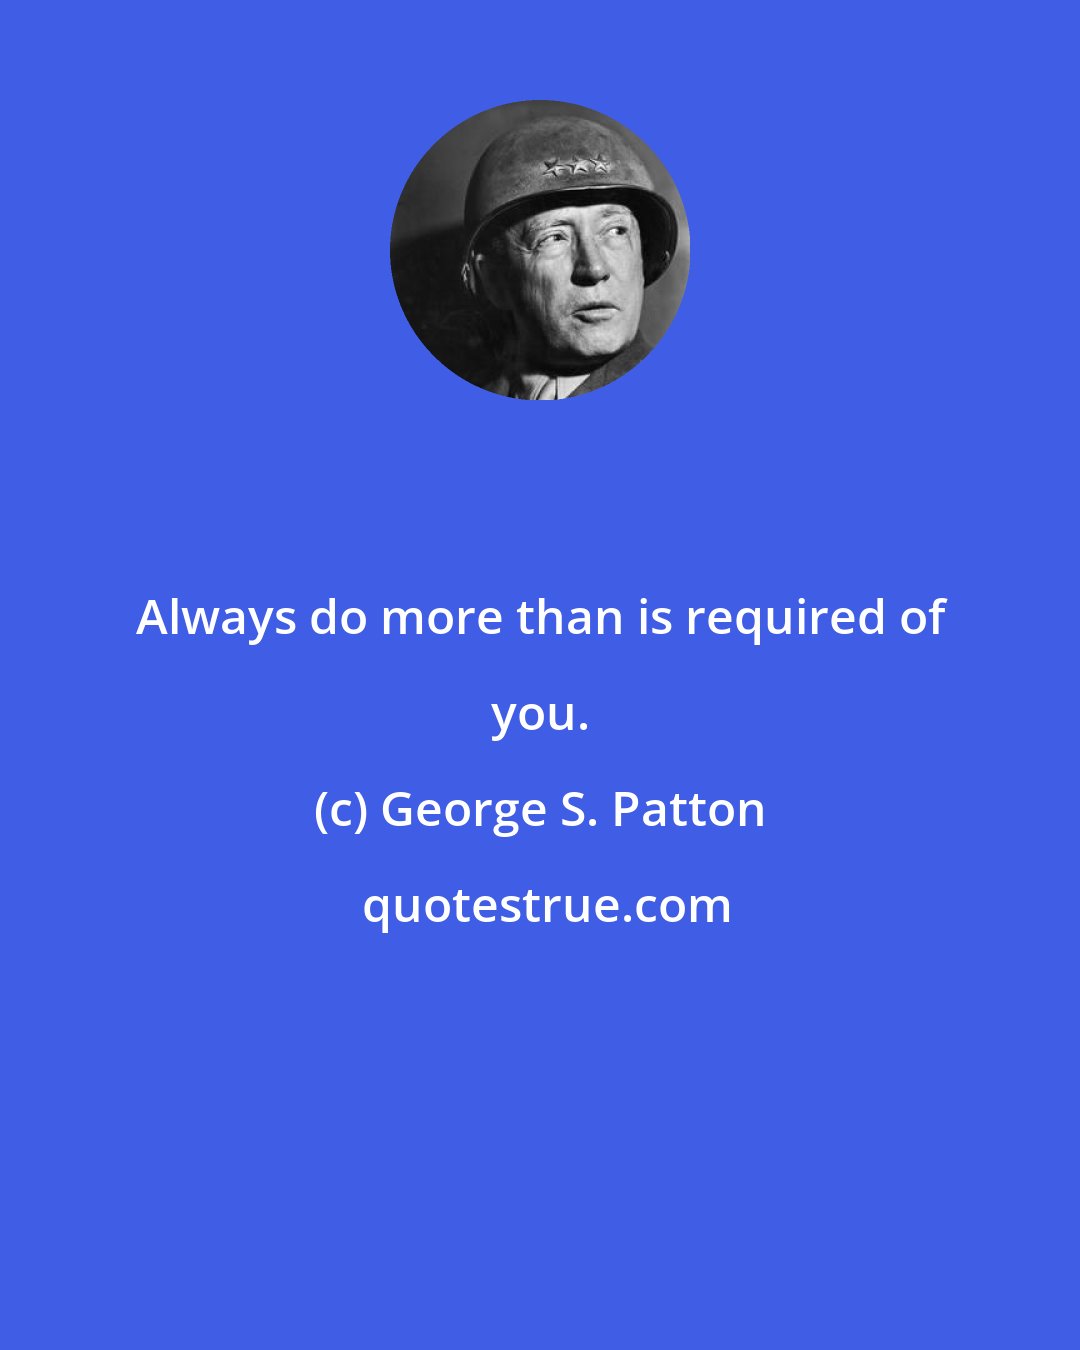 George S. Patton: Always do more than is required of you.